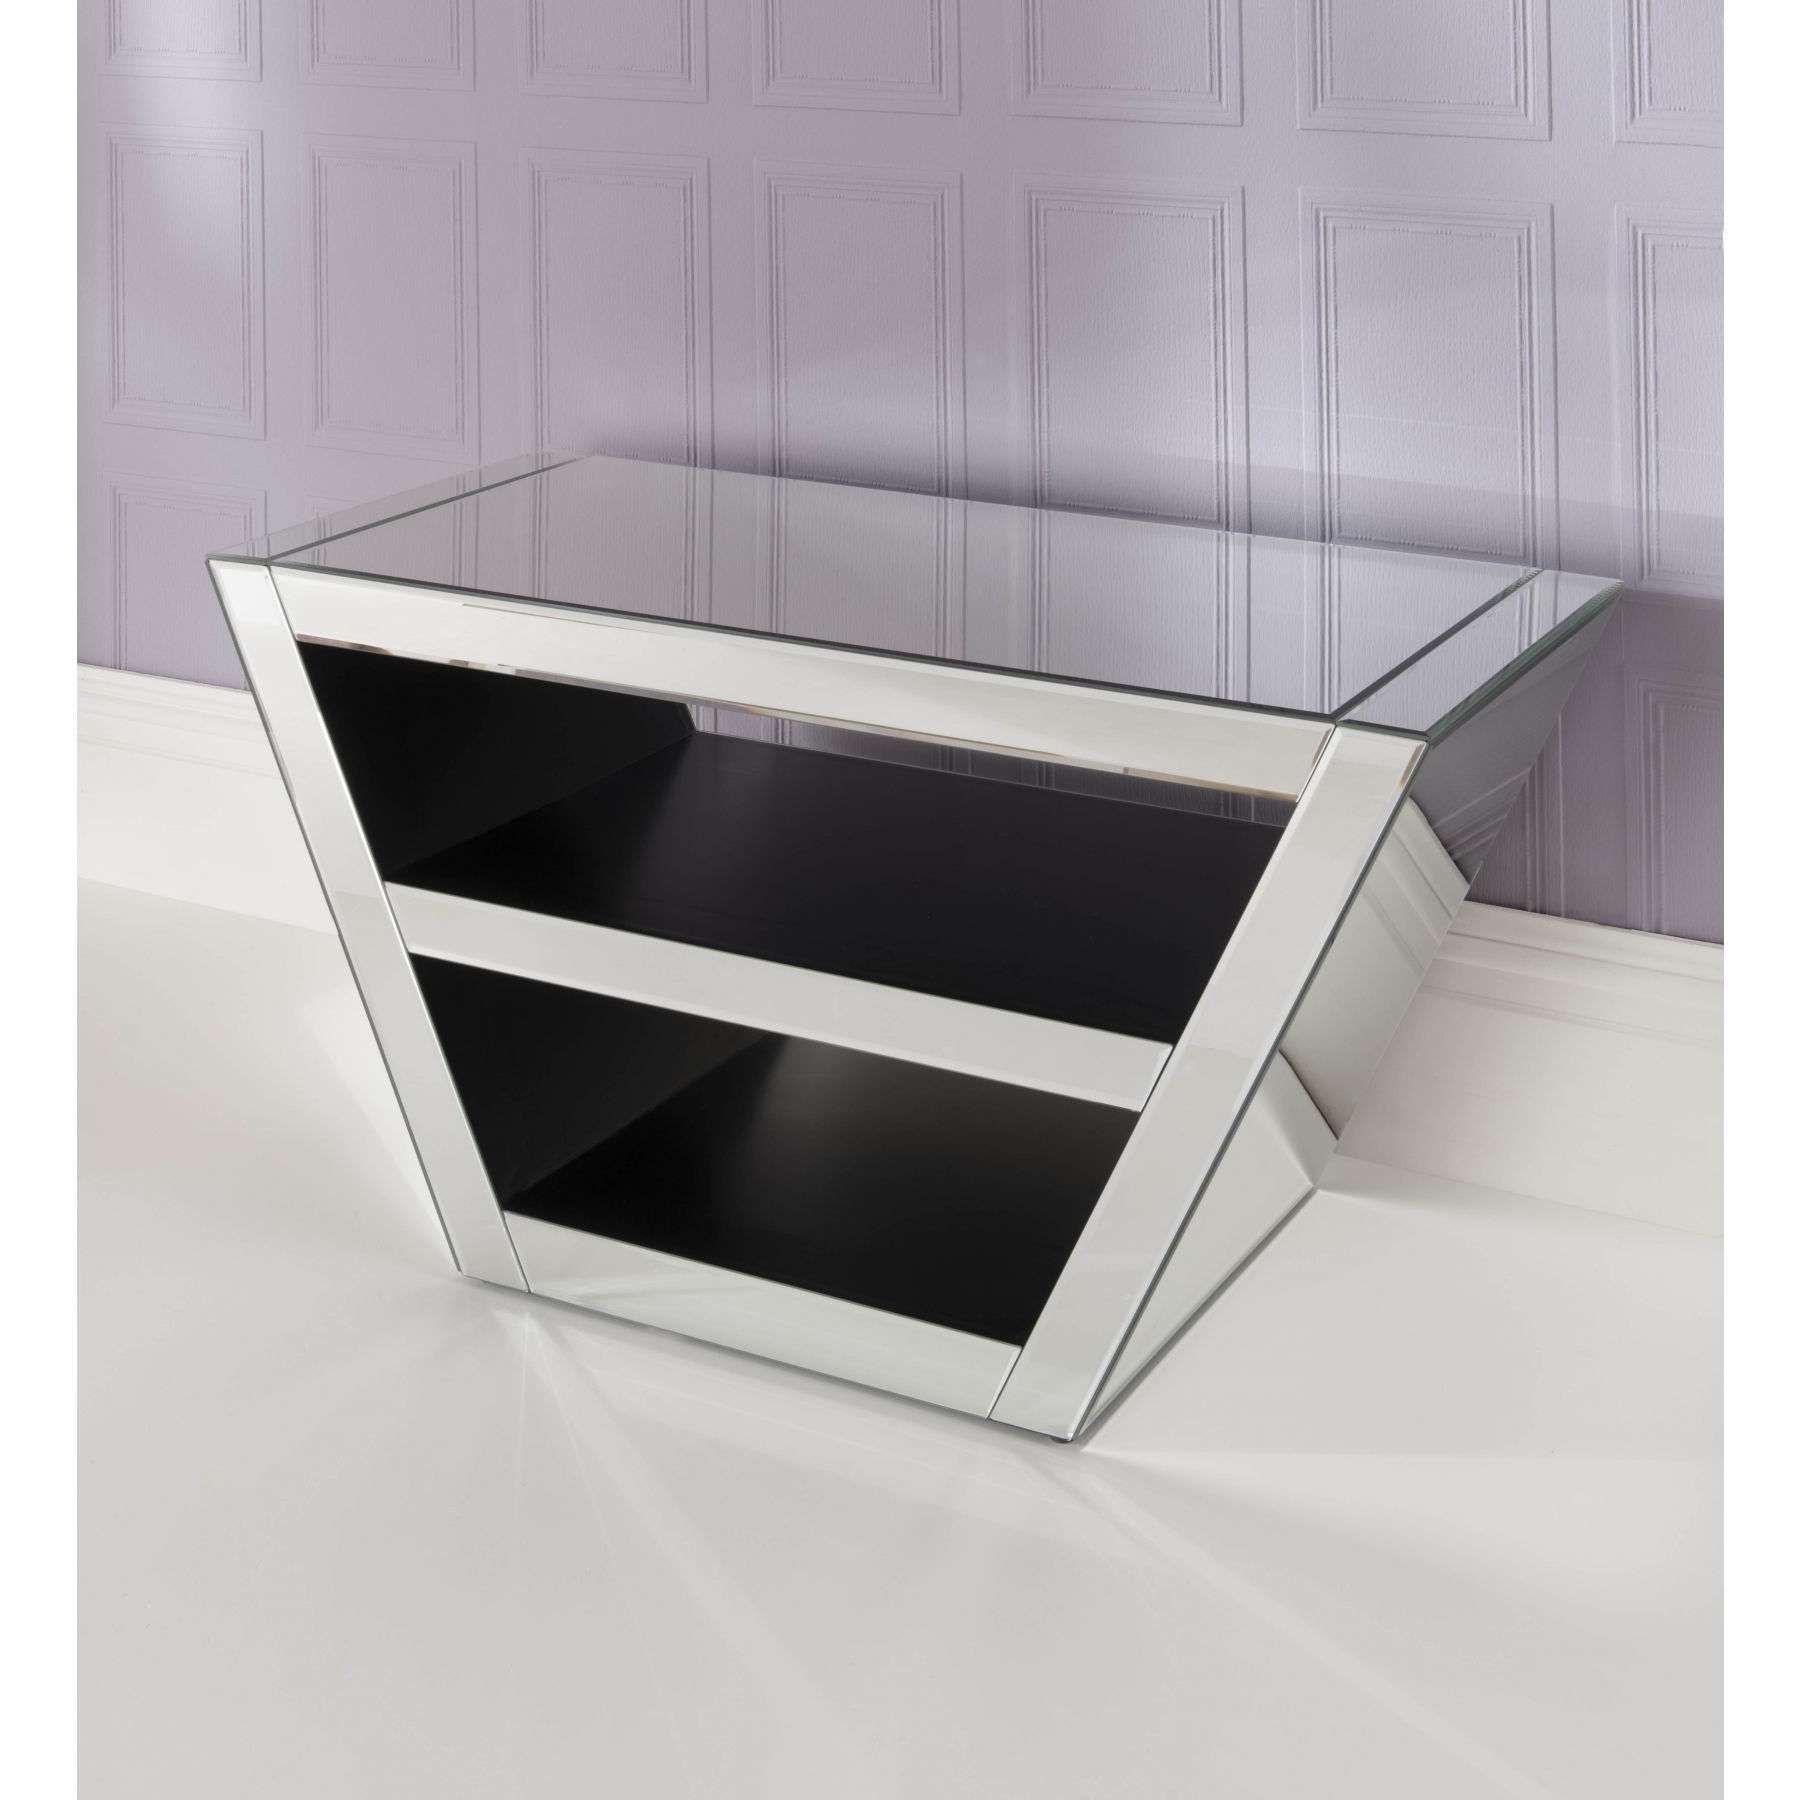 Mirrored Tv Cabinet | Venetian Glass Tv Stand | Homesdirect365 With Mirrored Tv Cabinets (View 2 of 20)